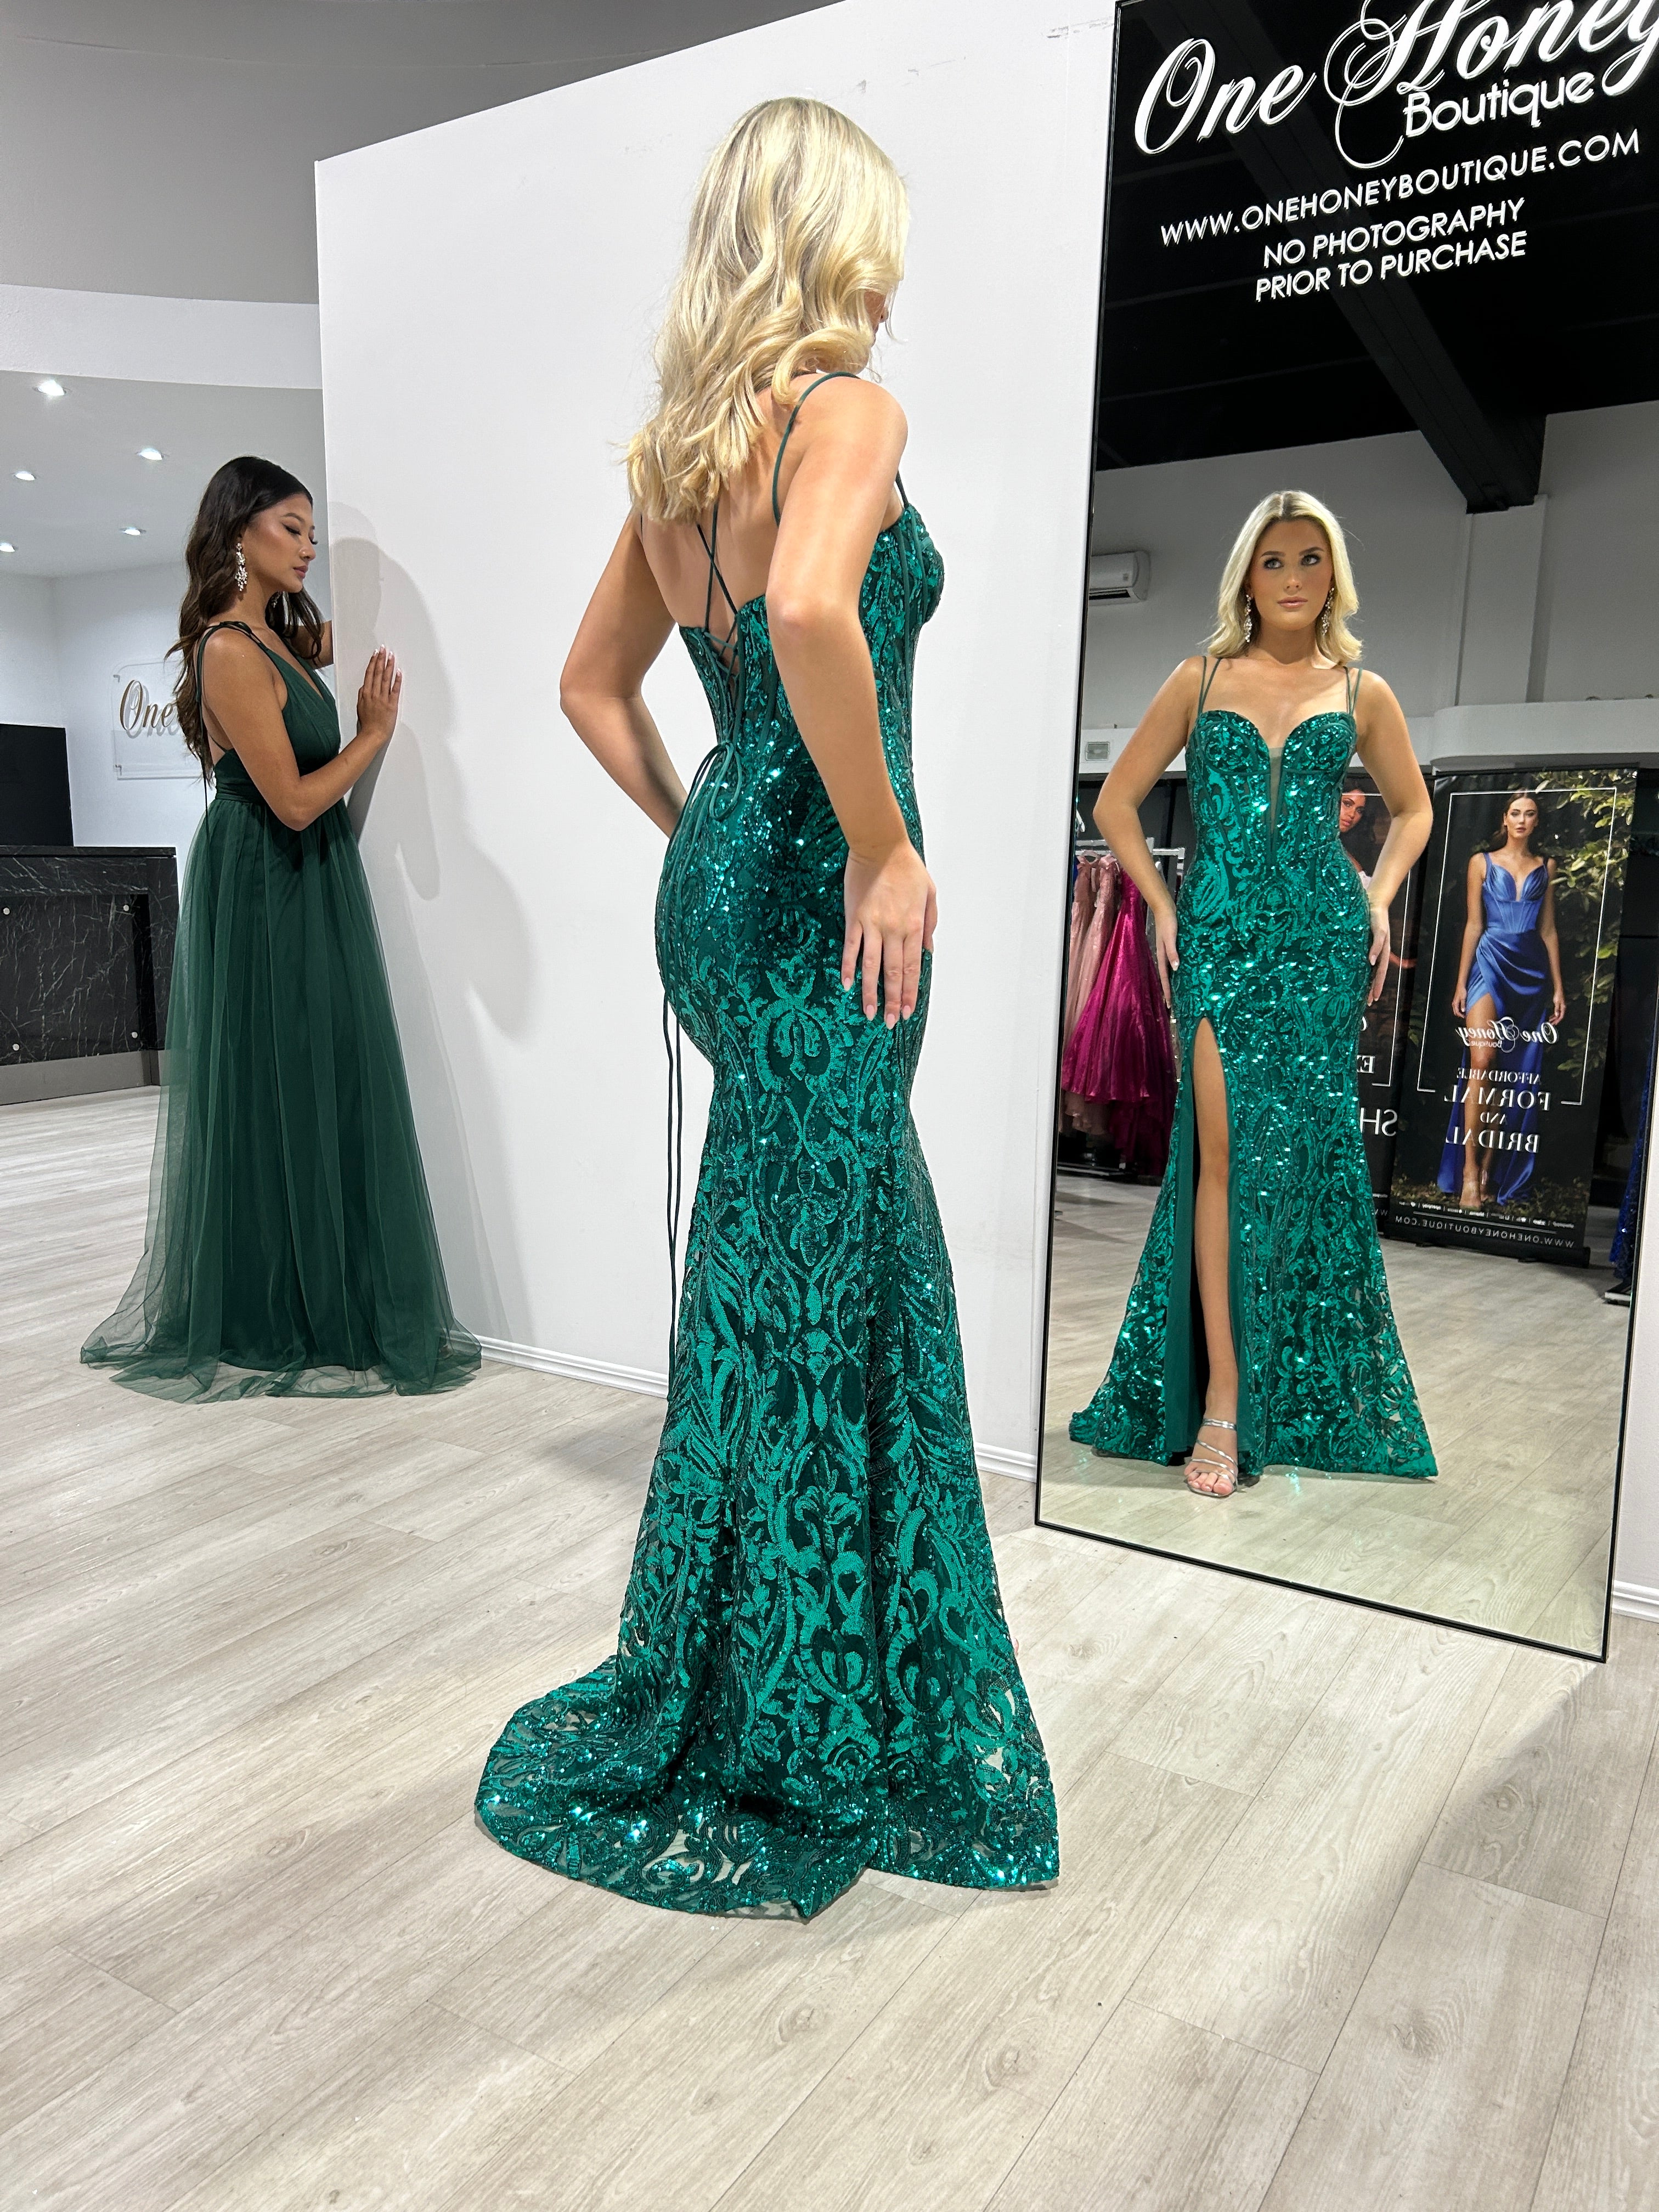 Honey Couture MILLIE Emerald Green Sequin Corset Mermaid Formal Gown Dress